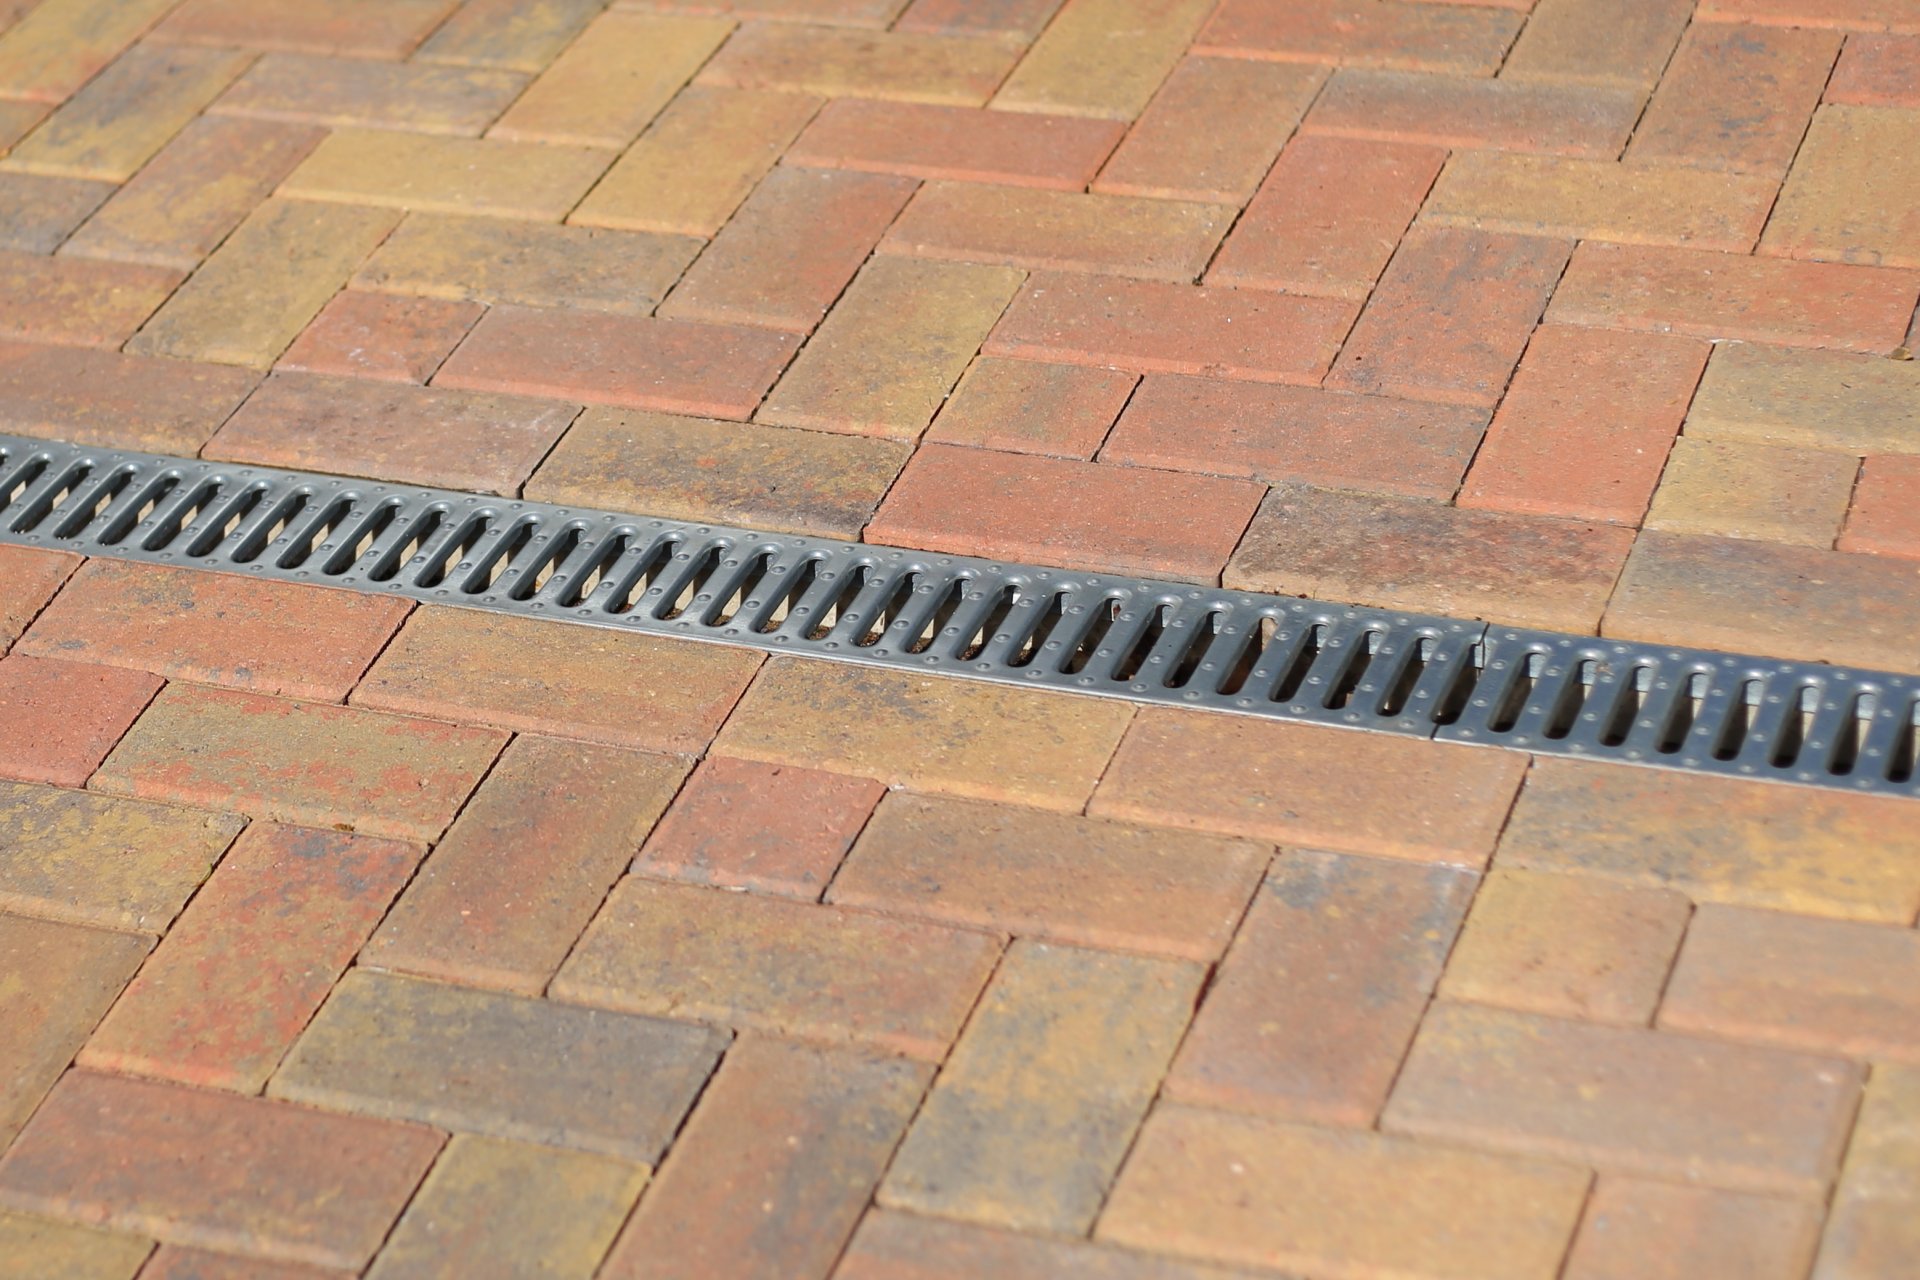 Professional Pavers showing perfect laid paving blocks with drainage